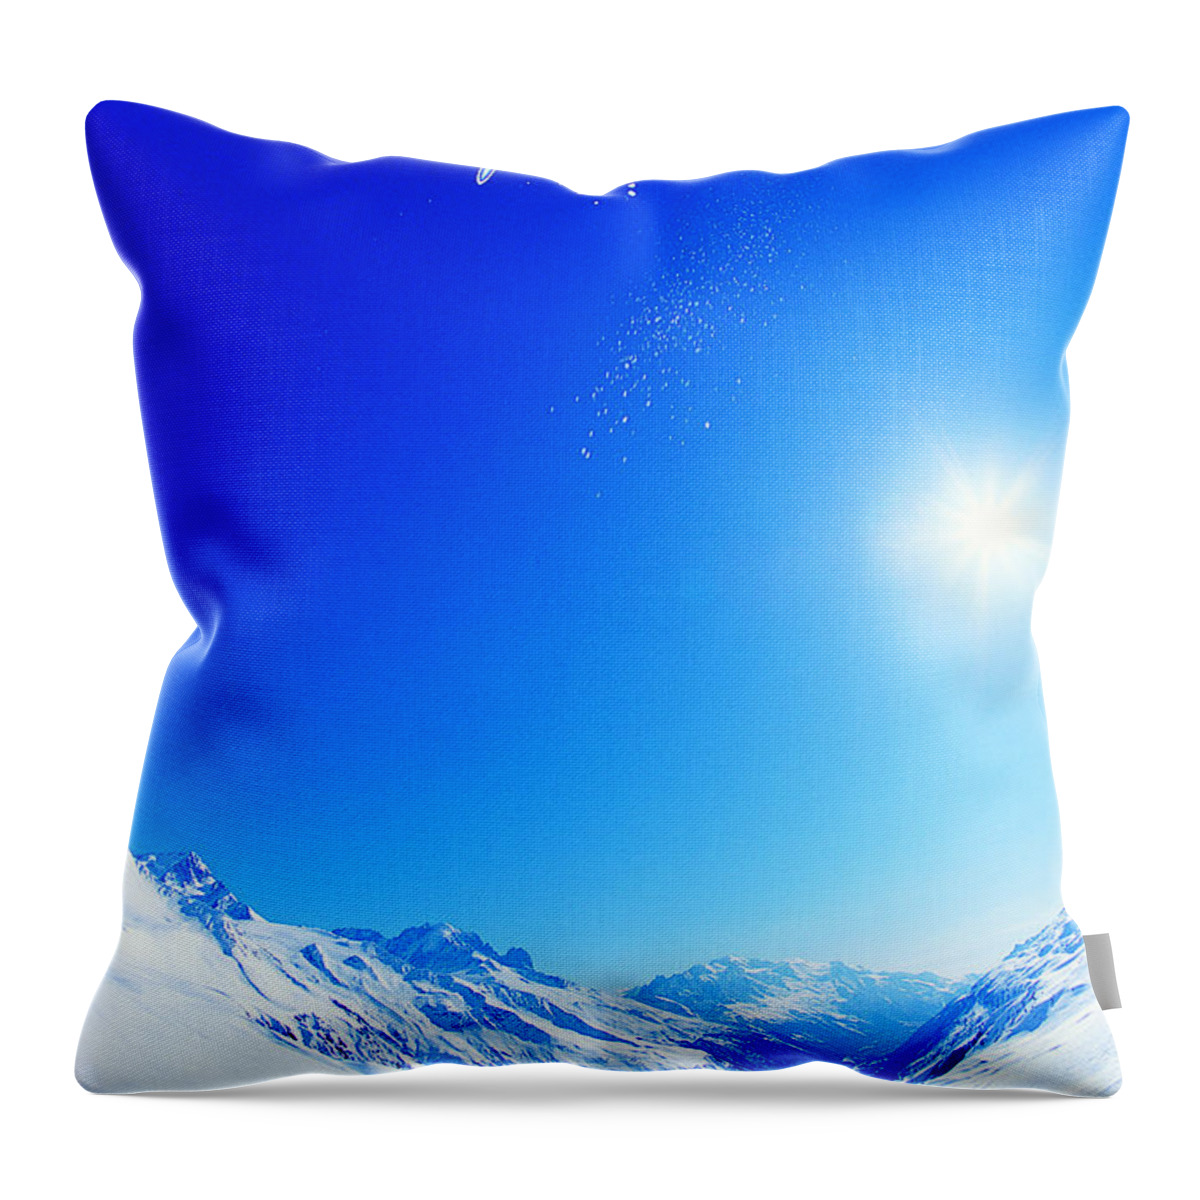 Skiing Throw Pillow featuring the photograph Man Skiing #1 by Digital Vision.